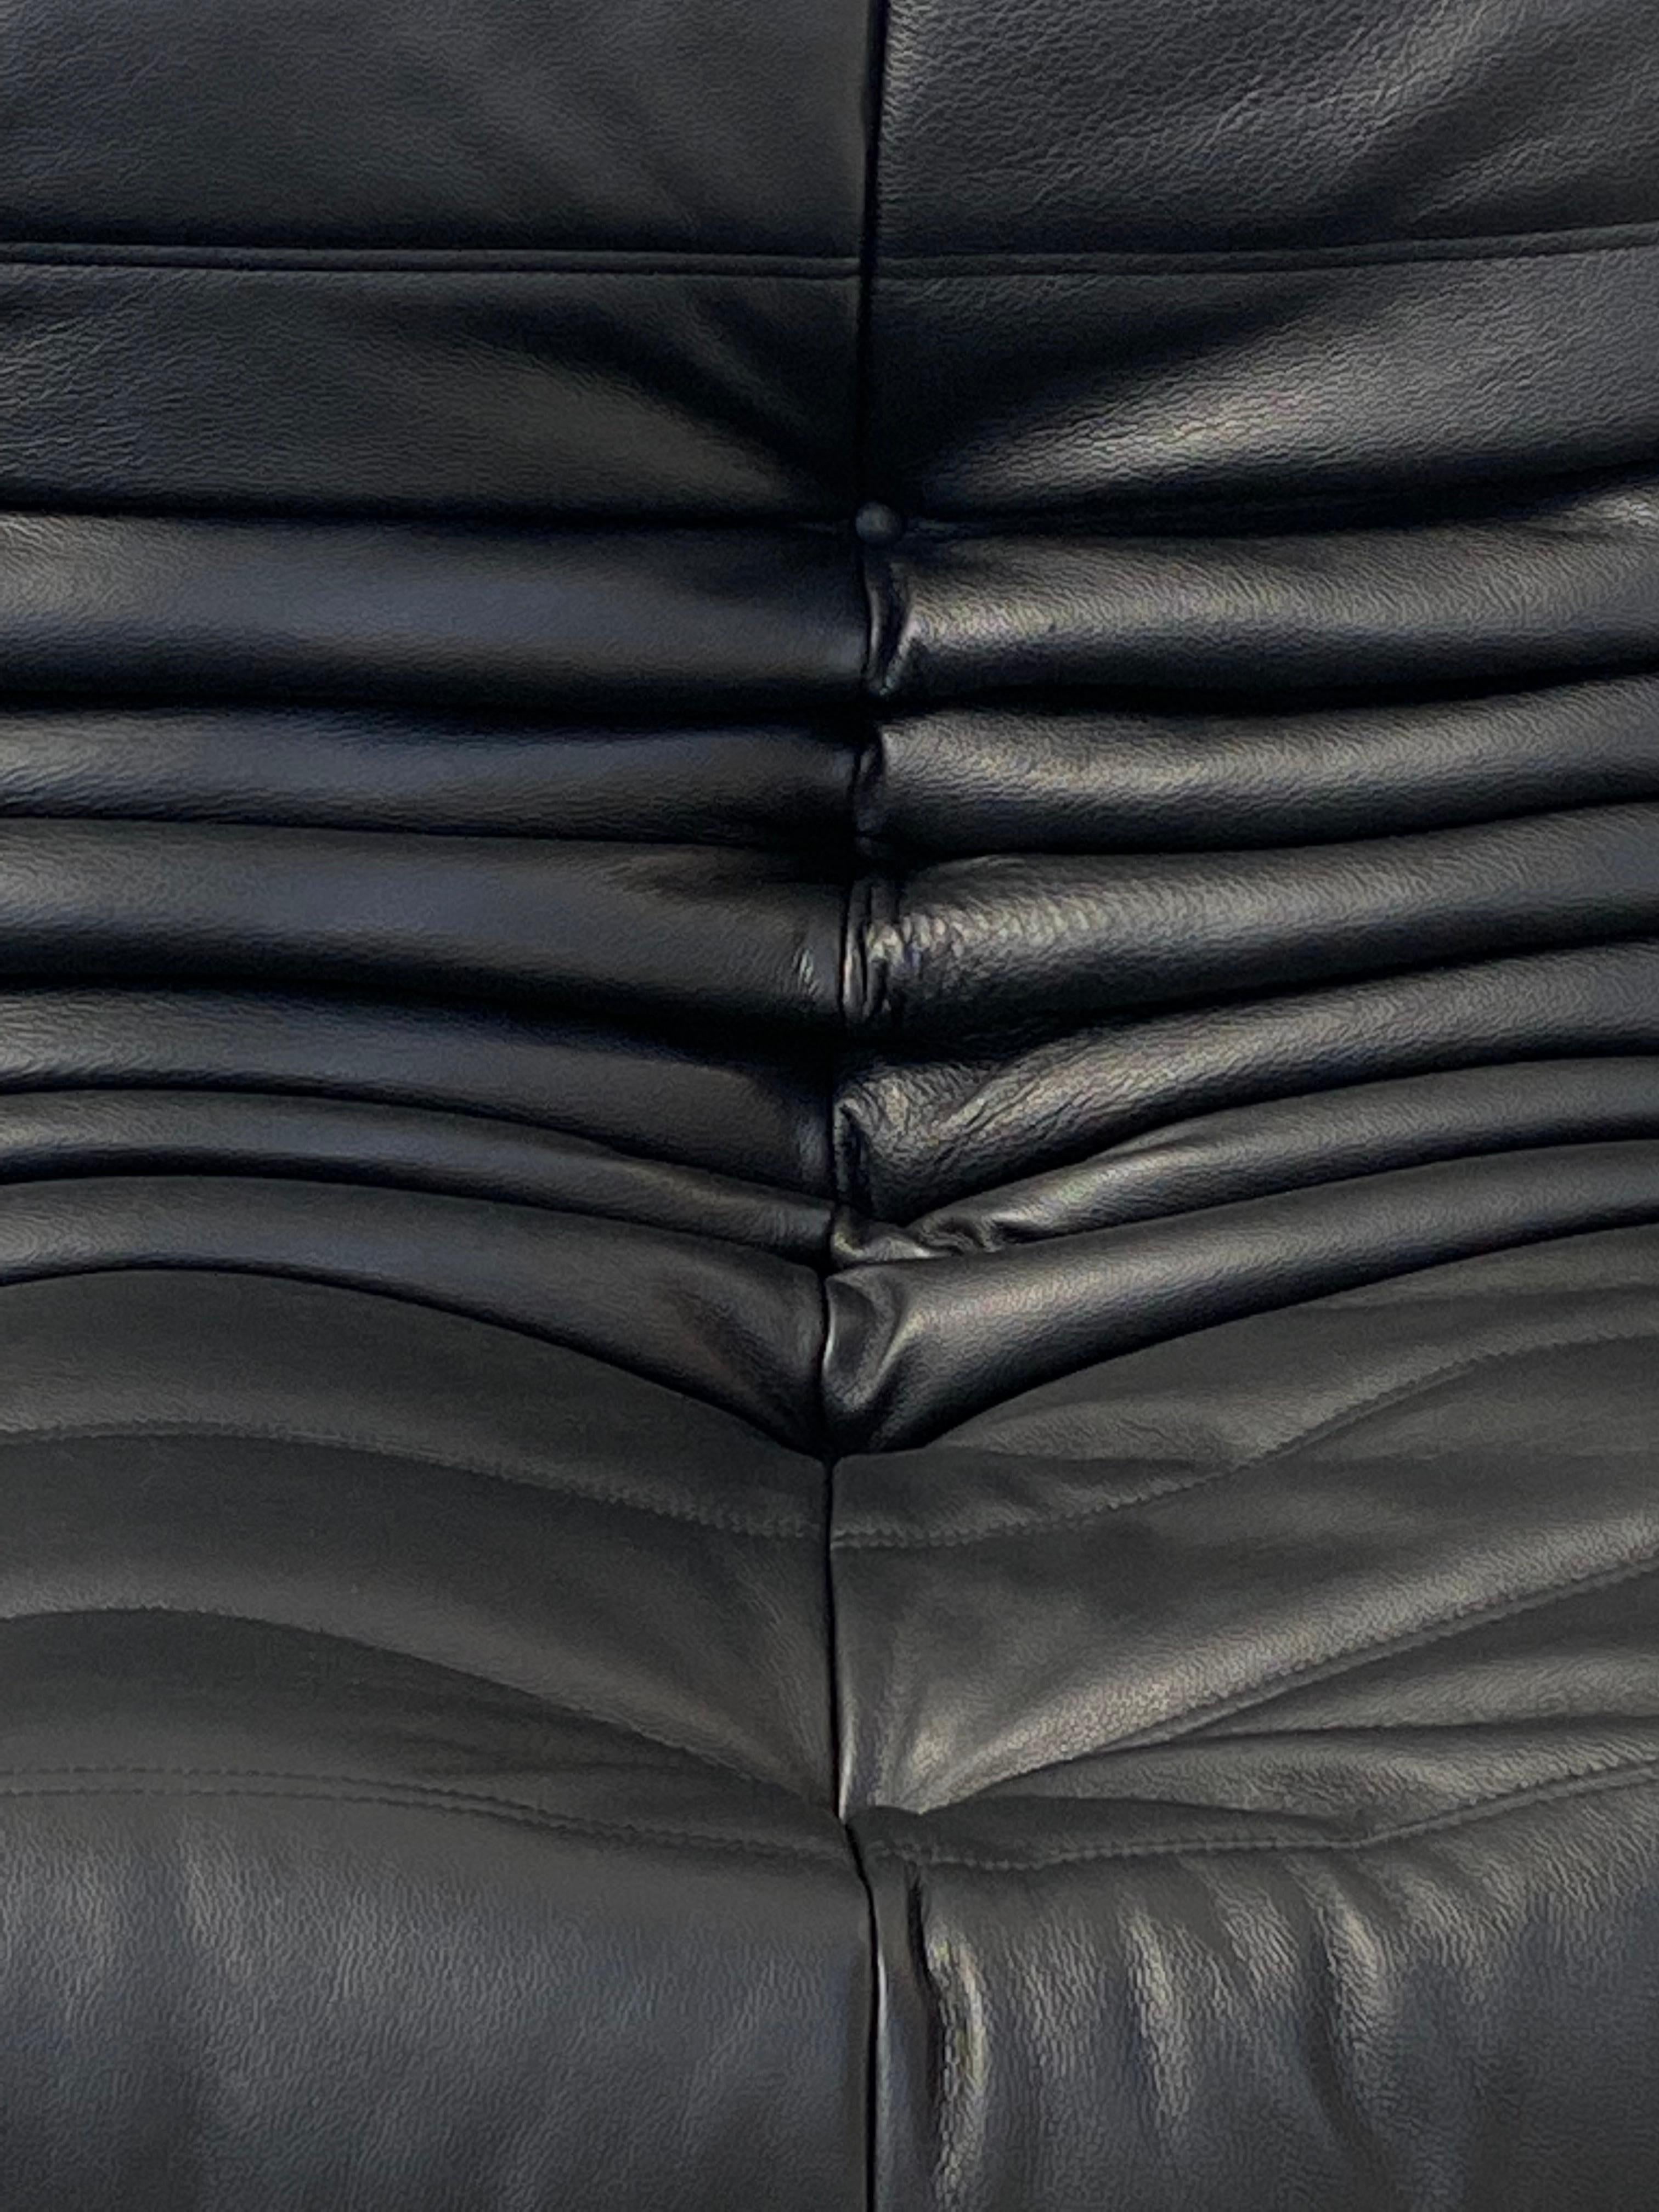 20th Century French Vintage Togo Sofa in Black Leather by Michel Ducaroy for Ligne Roset